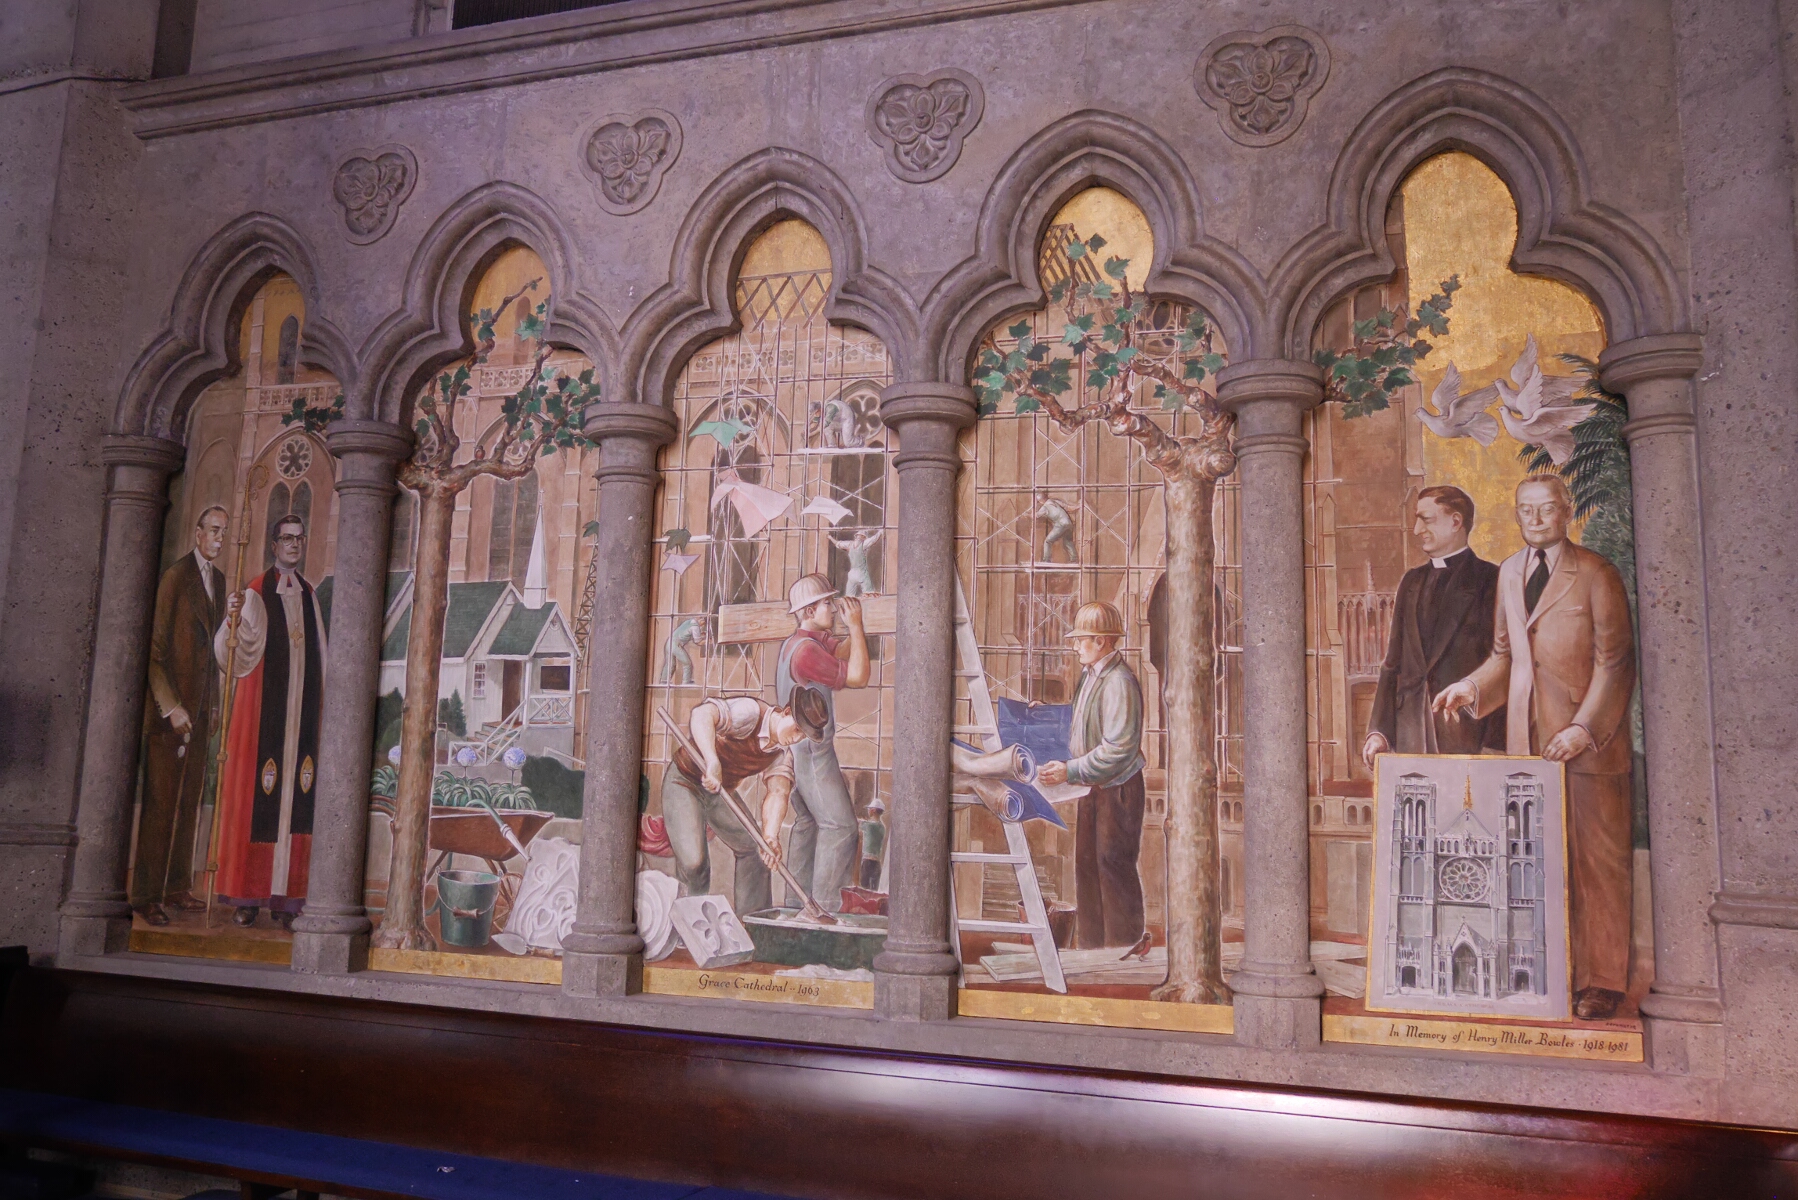 Mural of the construction of the cathedral.